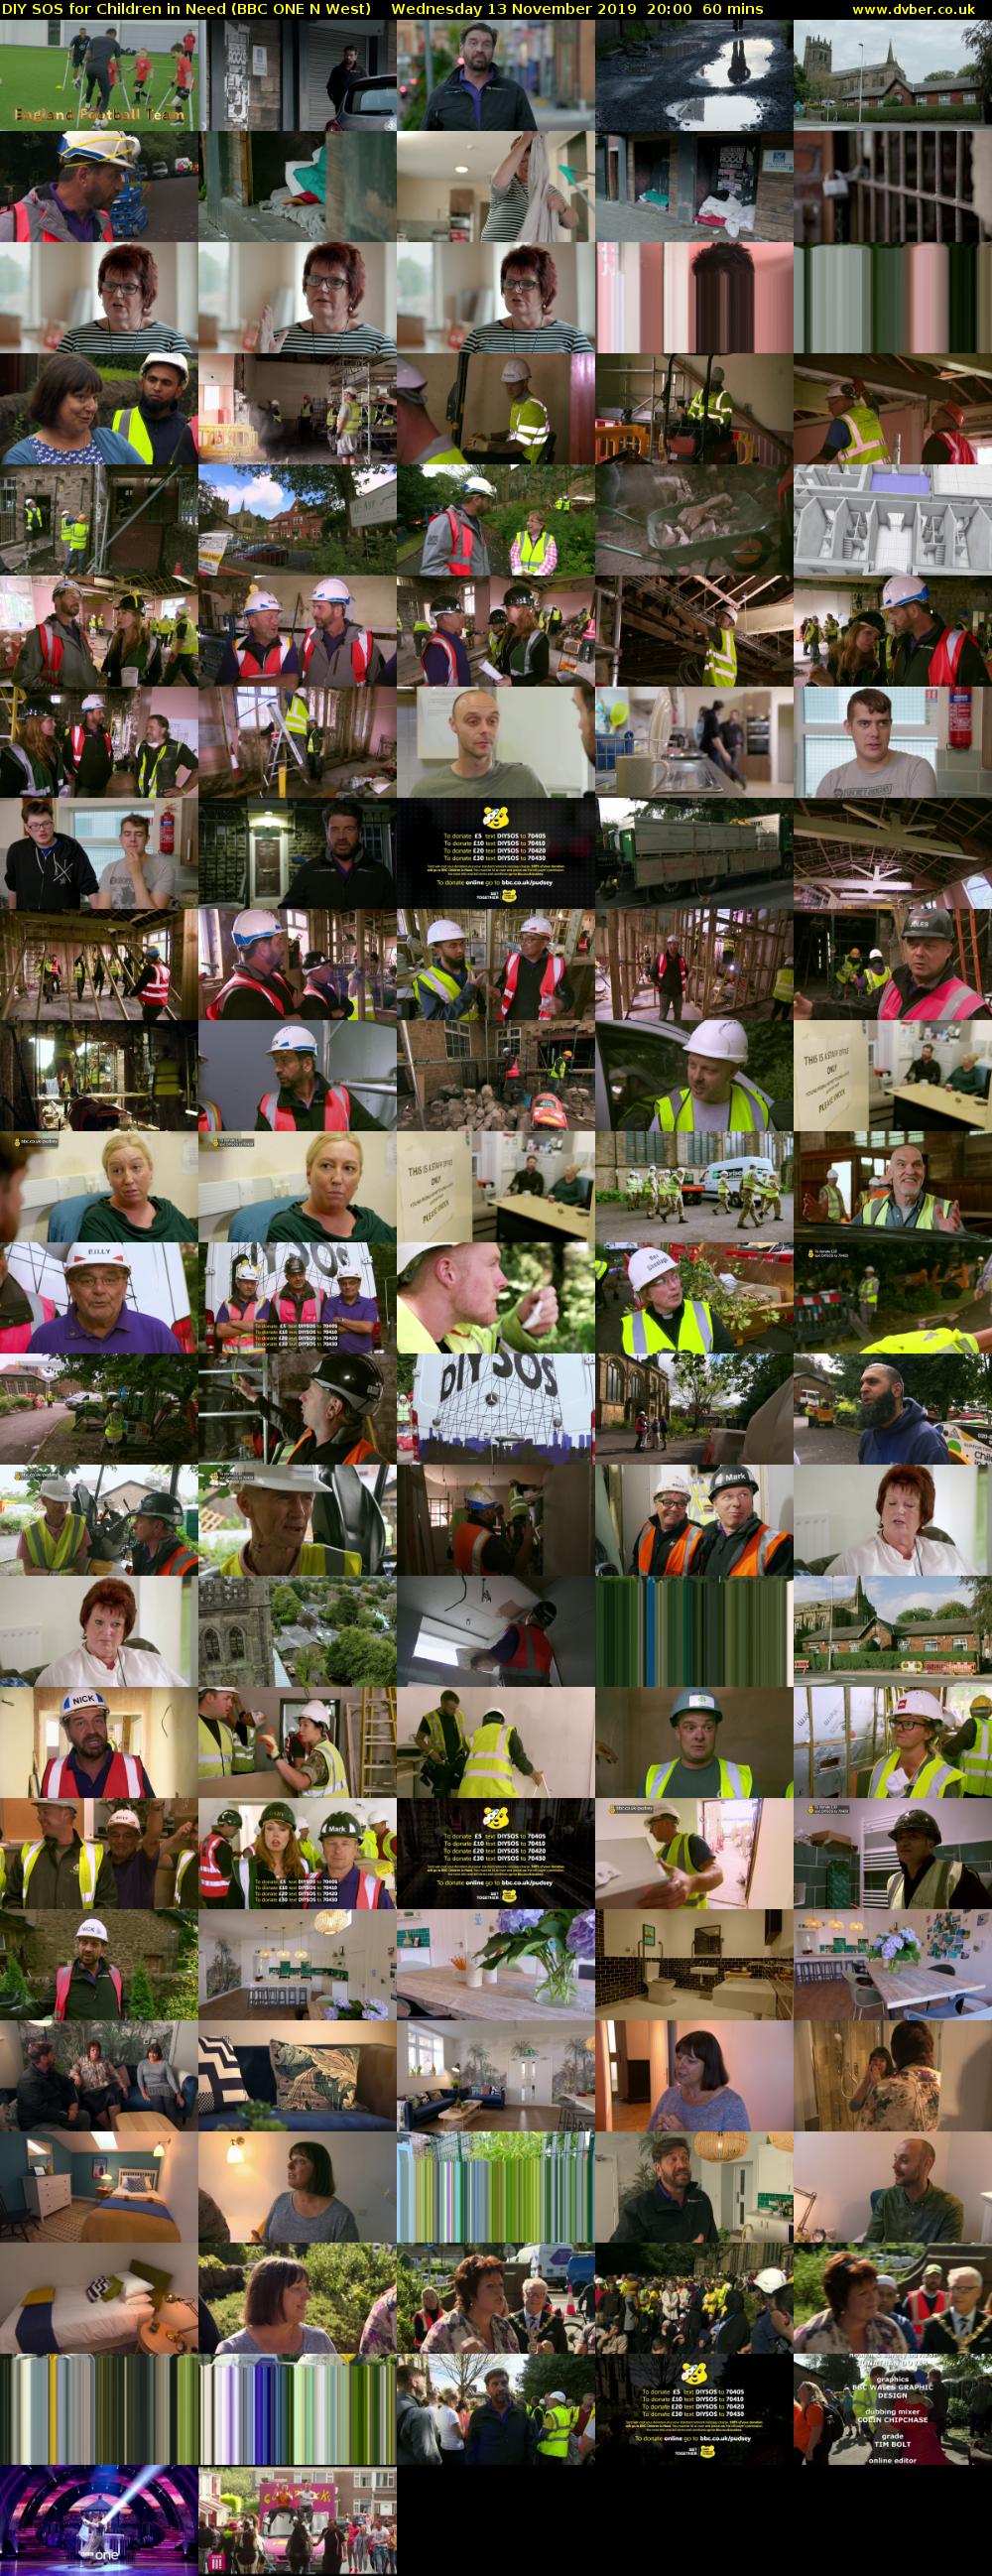 DIY SOS for Children in Need (BBC ONE N West) Wednesday 13 November 2019 20:00 - 21:00